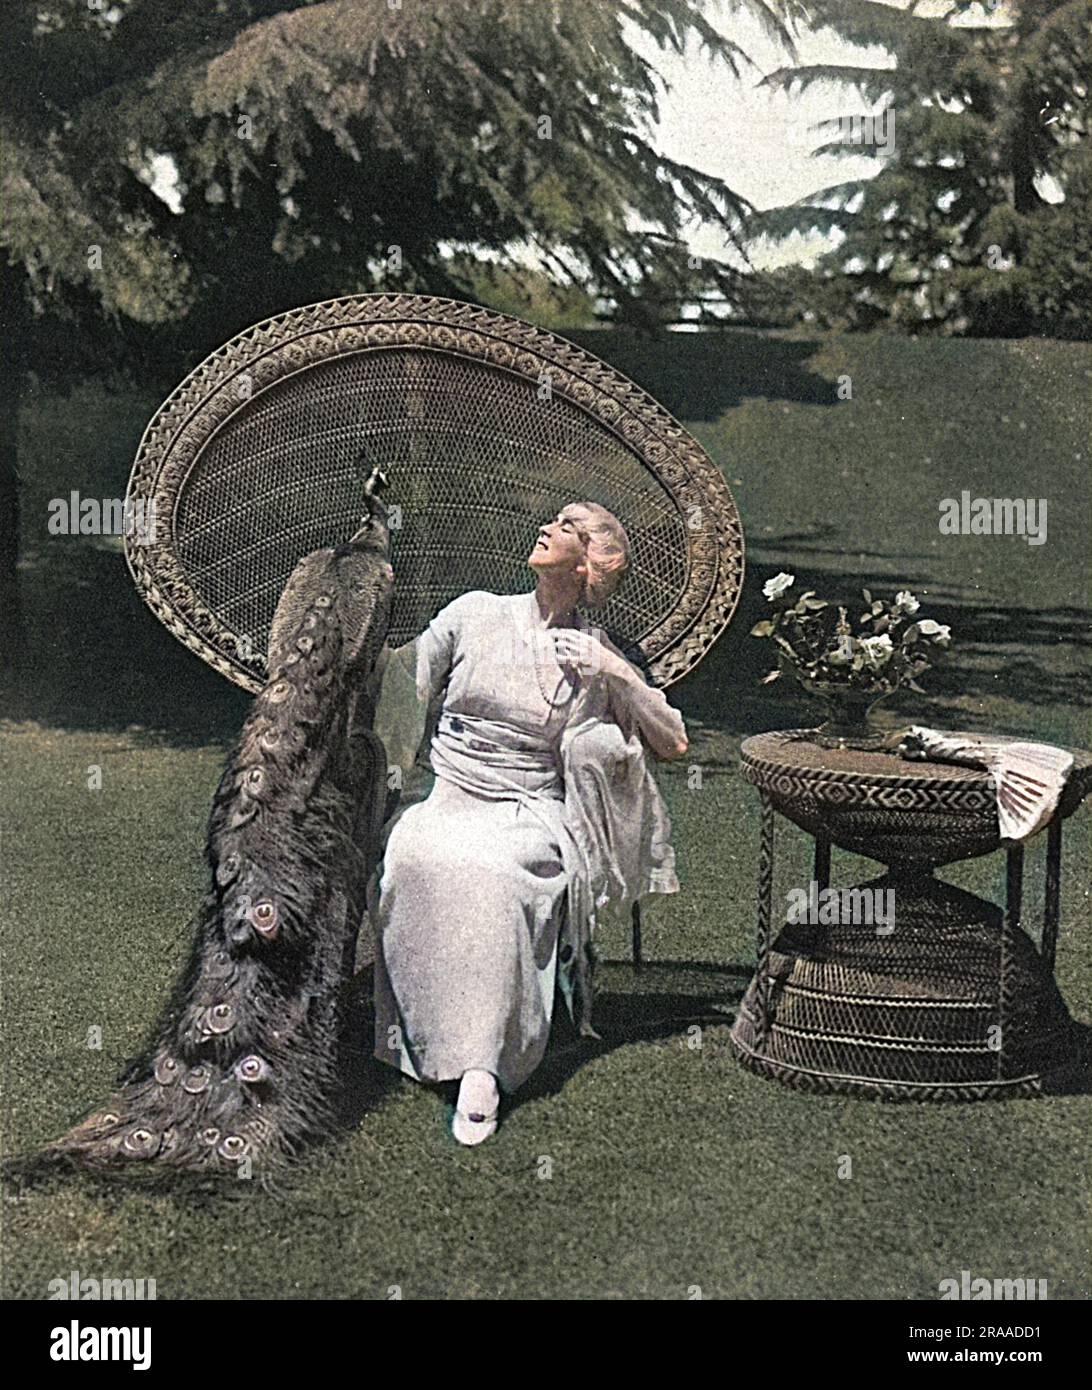 Ruth Saint Denis (1879 - 1968), modern dance pioneer, introducing eastern ideas into the art. She was the co-founder of the American Denishawn School of Dance and the teacher of several notable performers.  Pictured at home, in her garden in California with her pet peacock.     Date: 1917 Stock Photo